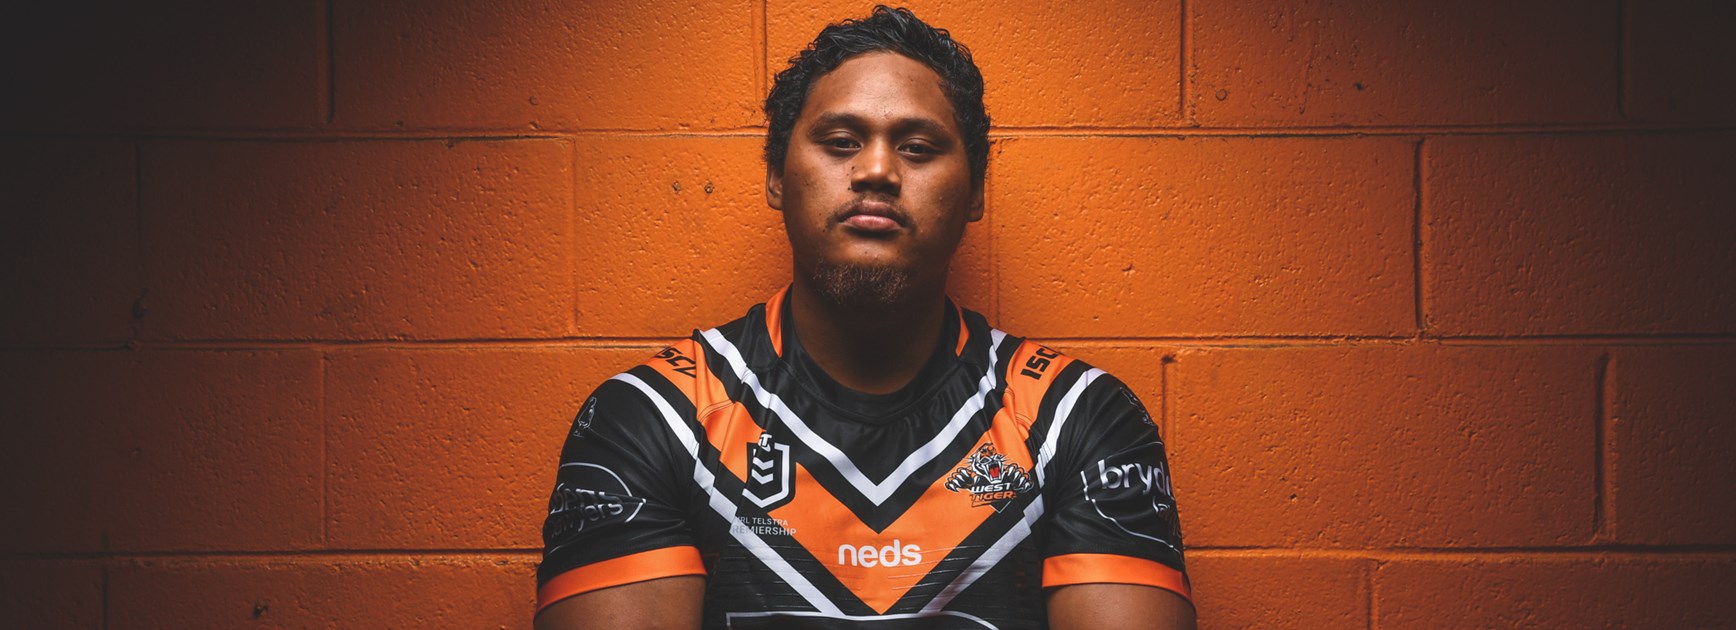 Wests Tigers new recruit Luciano Leilua